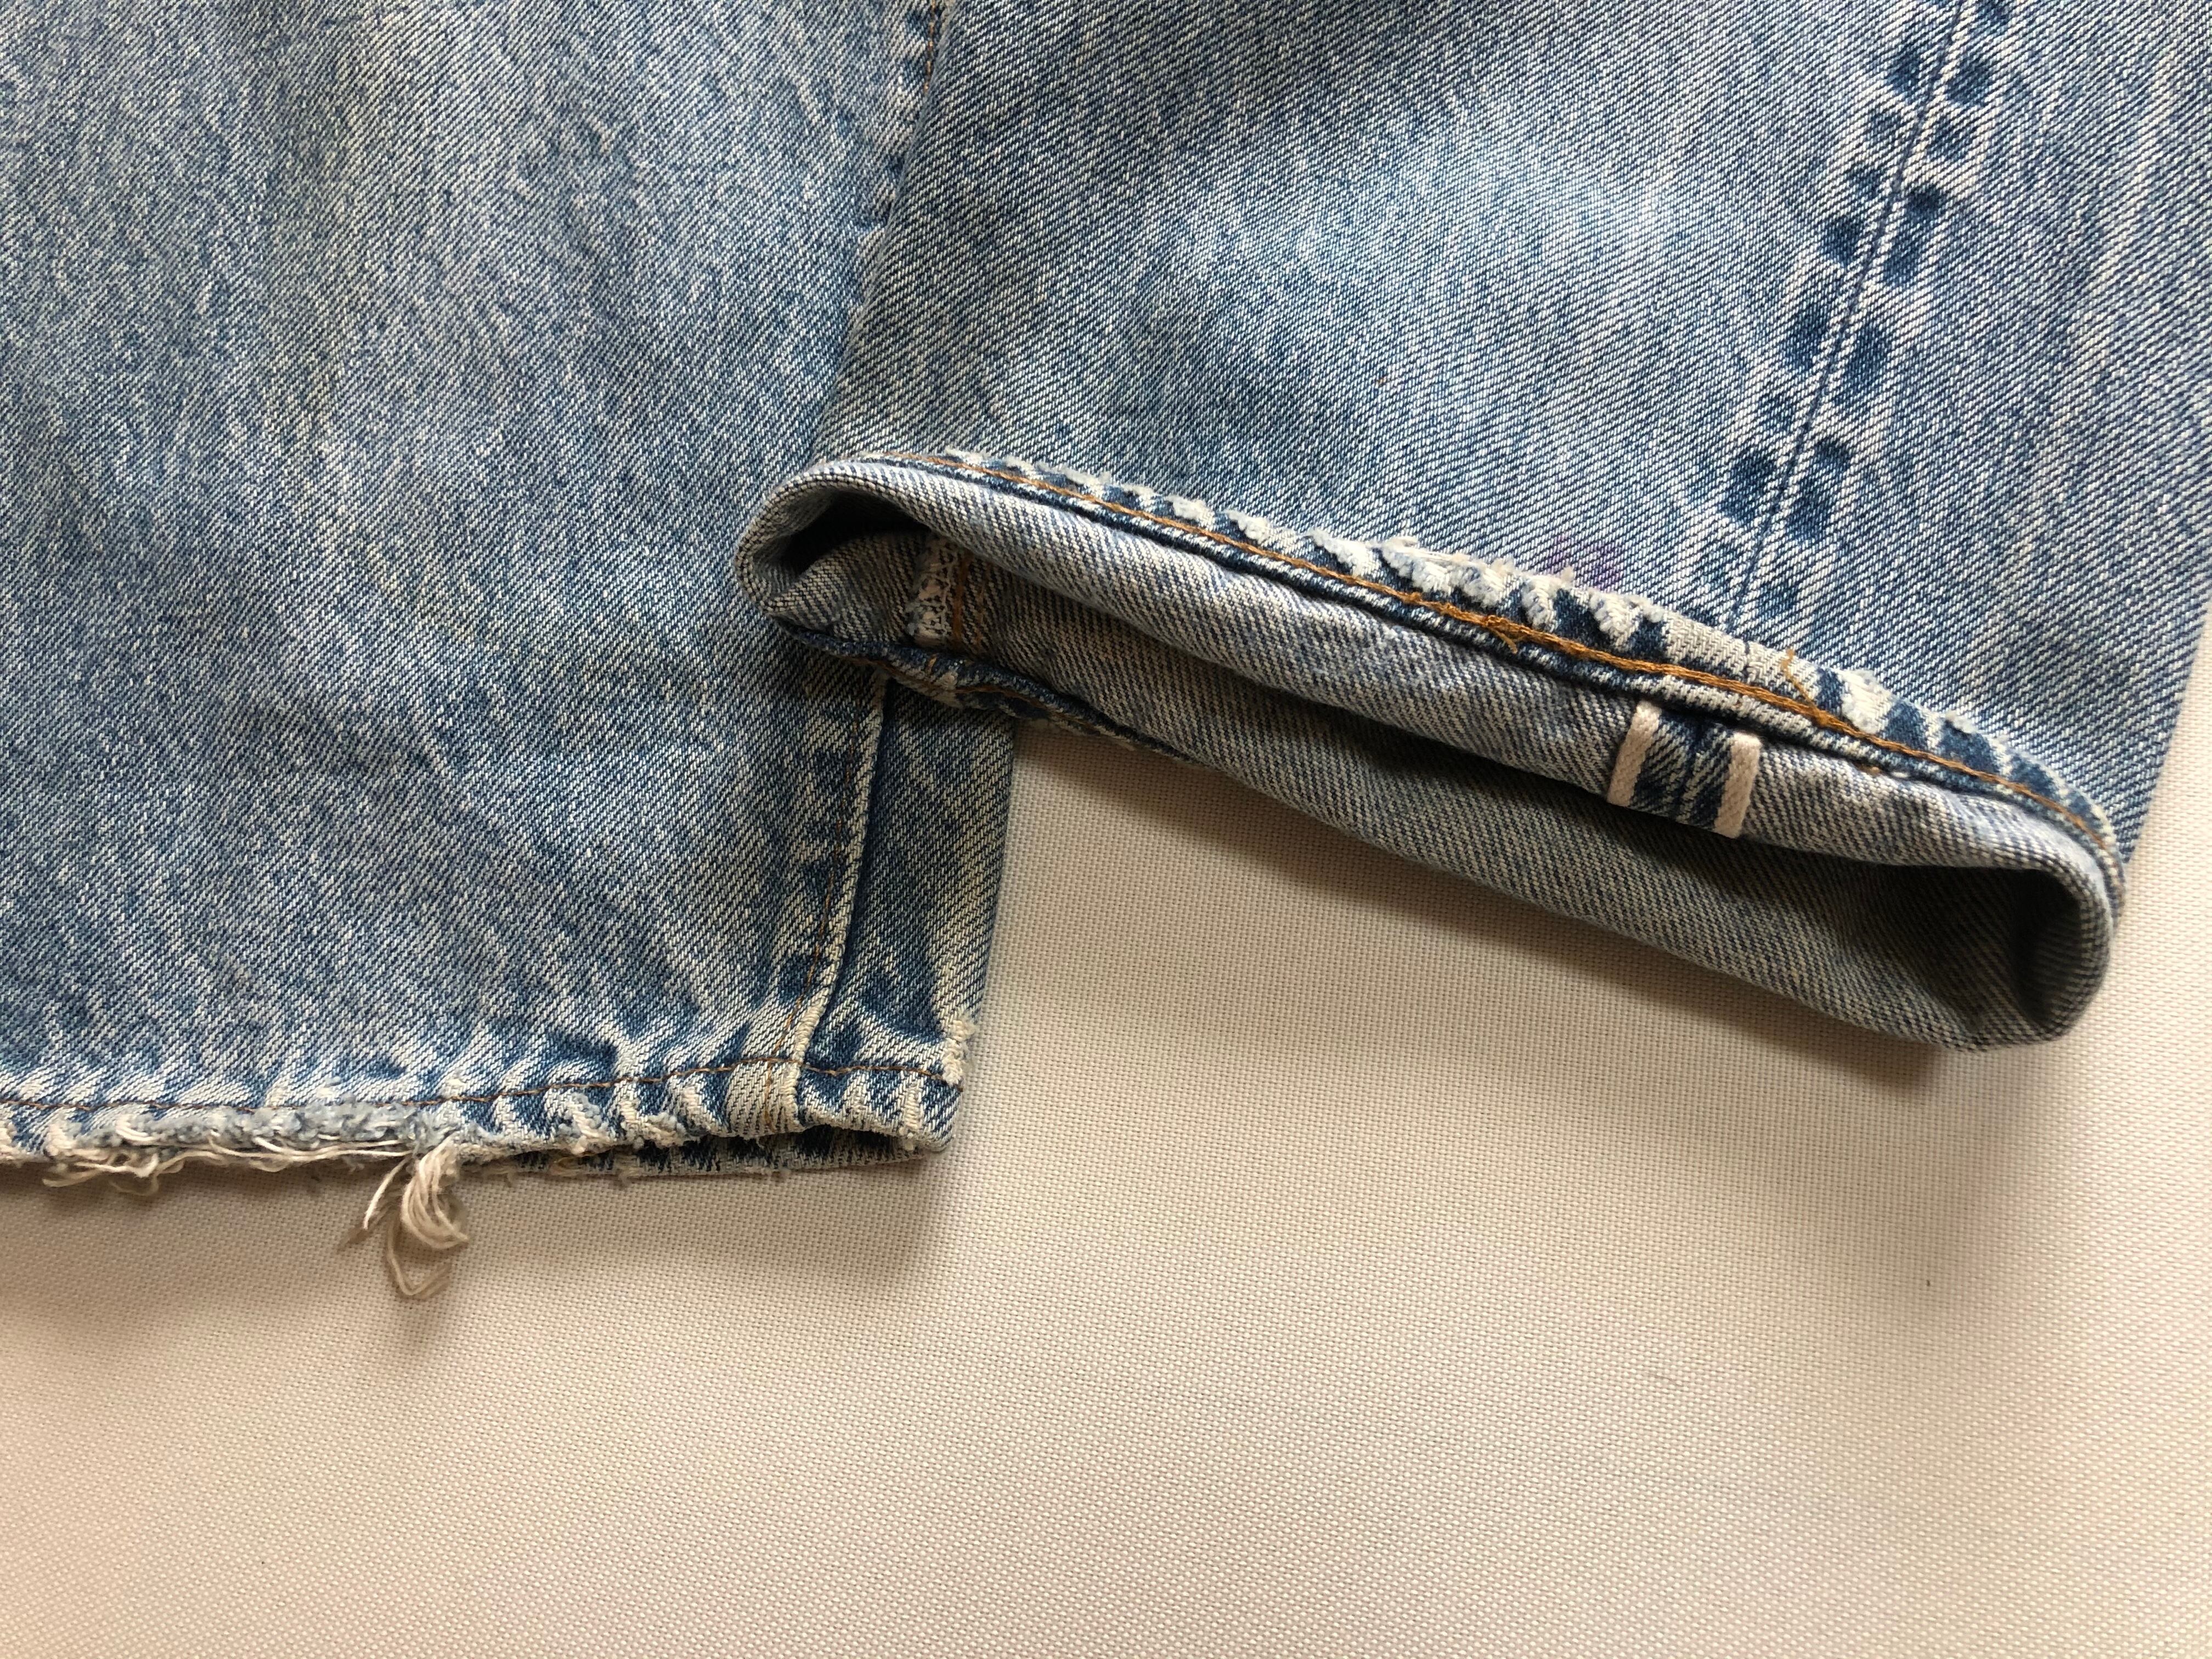 70's USA製！LEVI'S リーバイス 501 66後期 168 | ＳＥＣＯＮＤ HAND RED